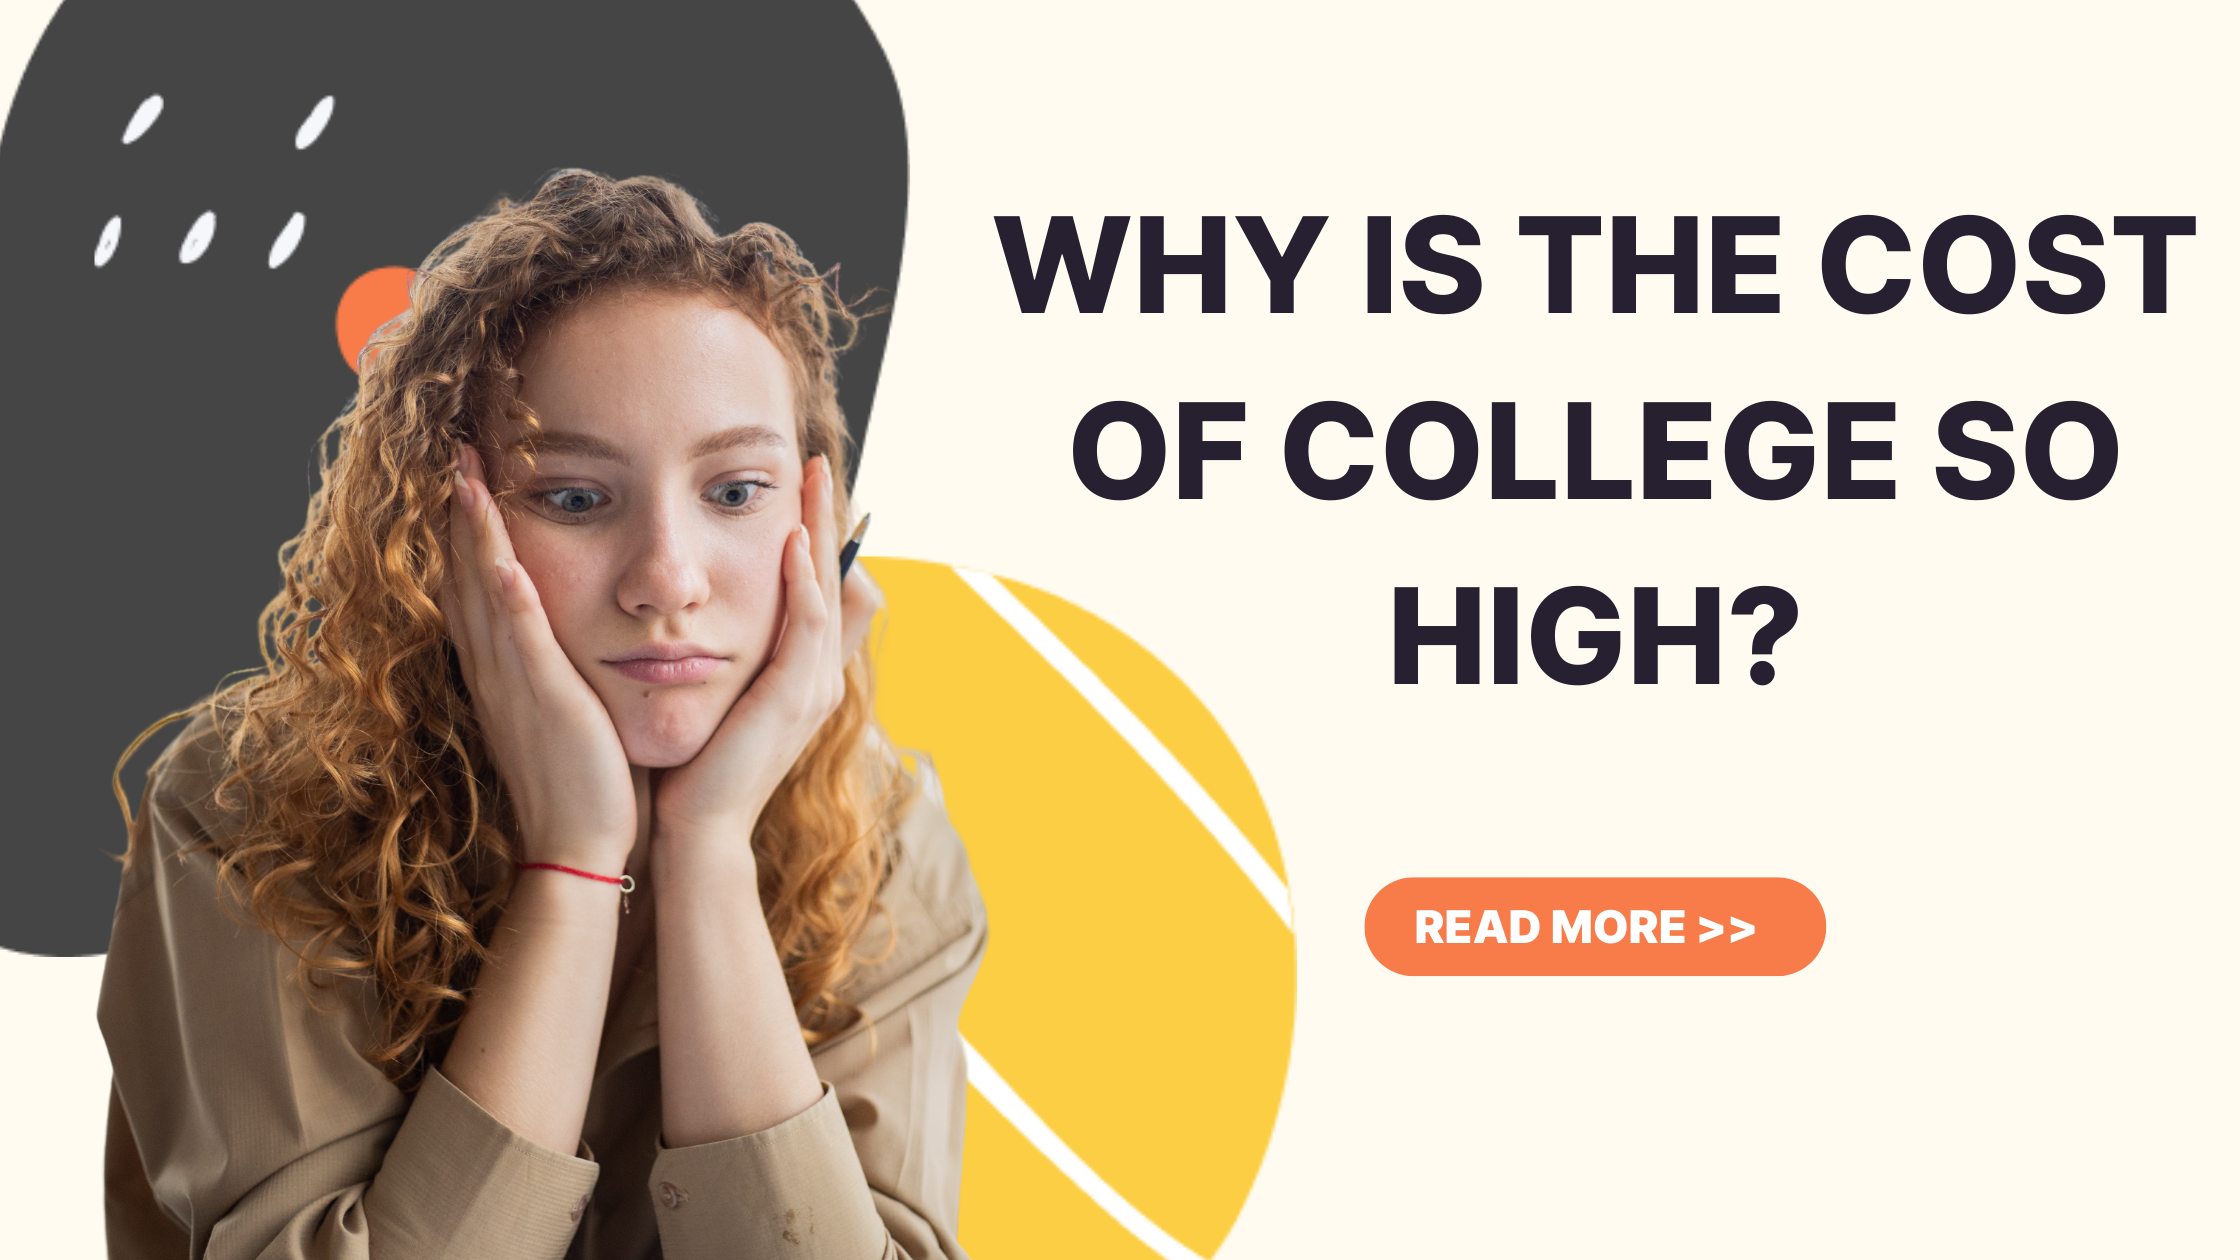 is the cost of college too high essay